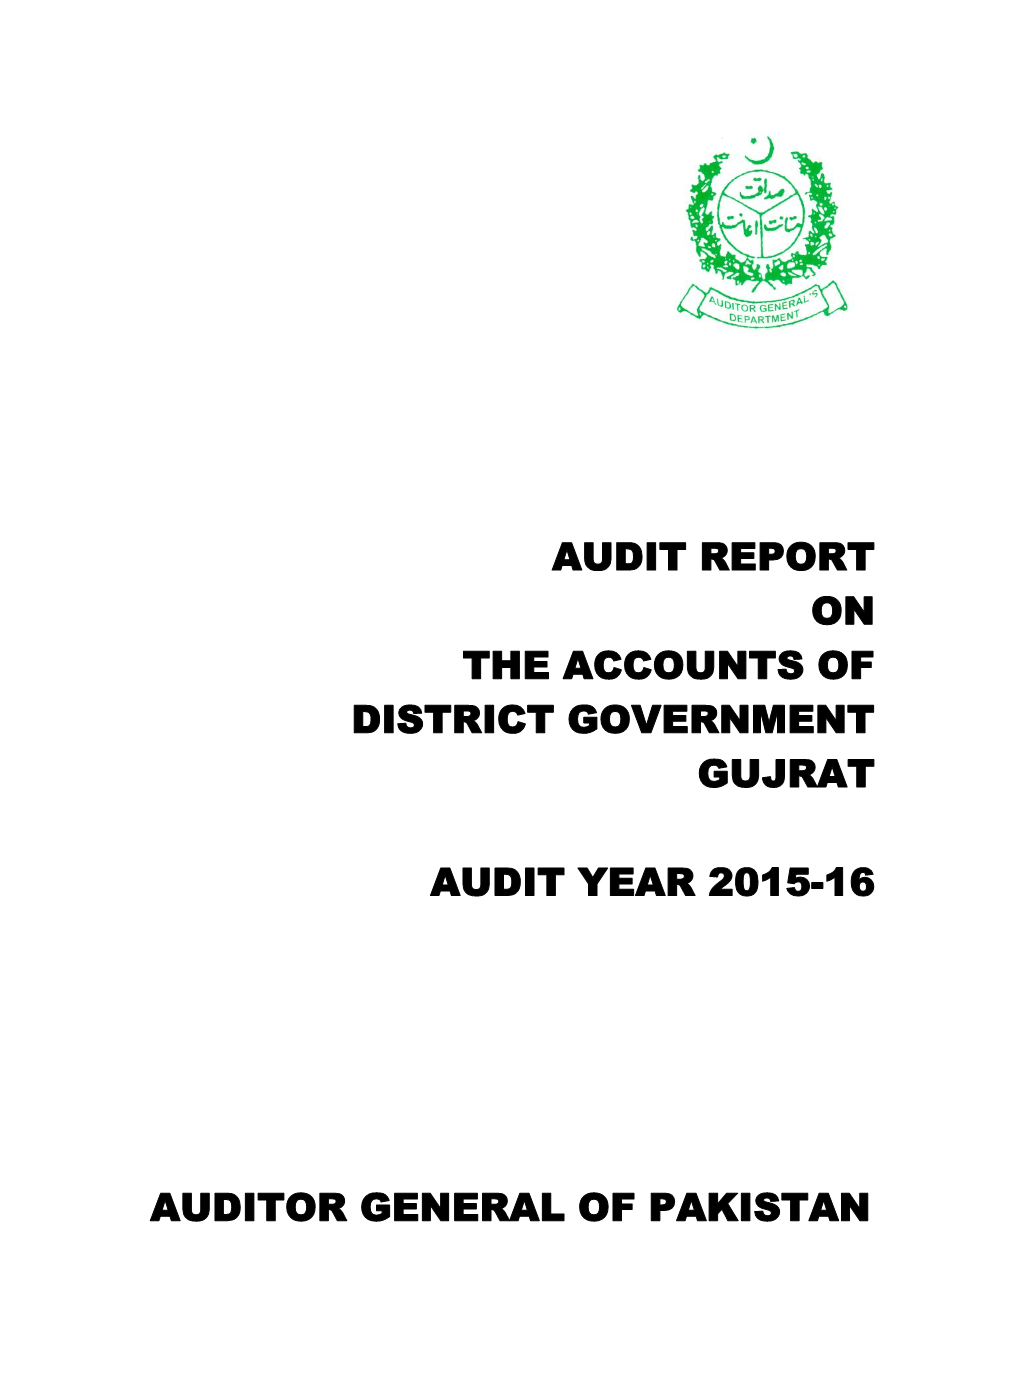 Audit Report on the Accounts of District Government Gujrat Audit Year 2015